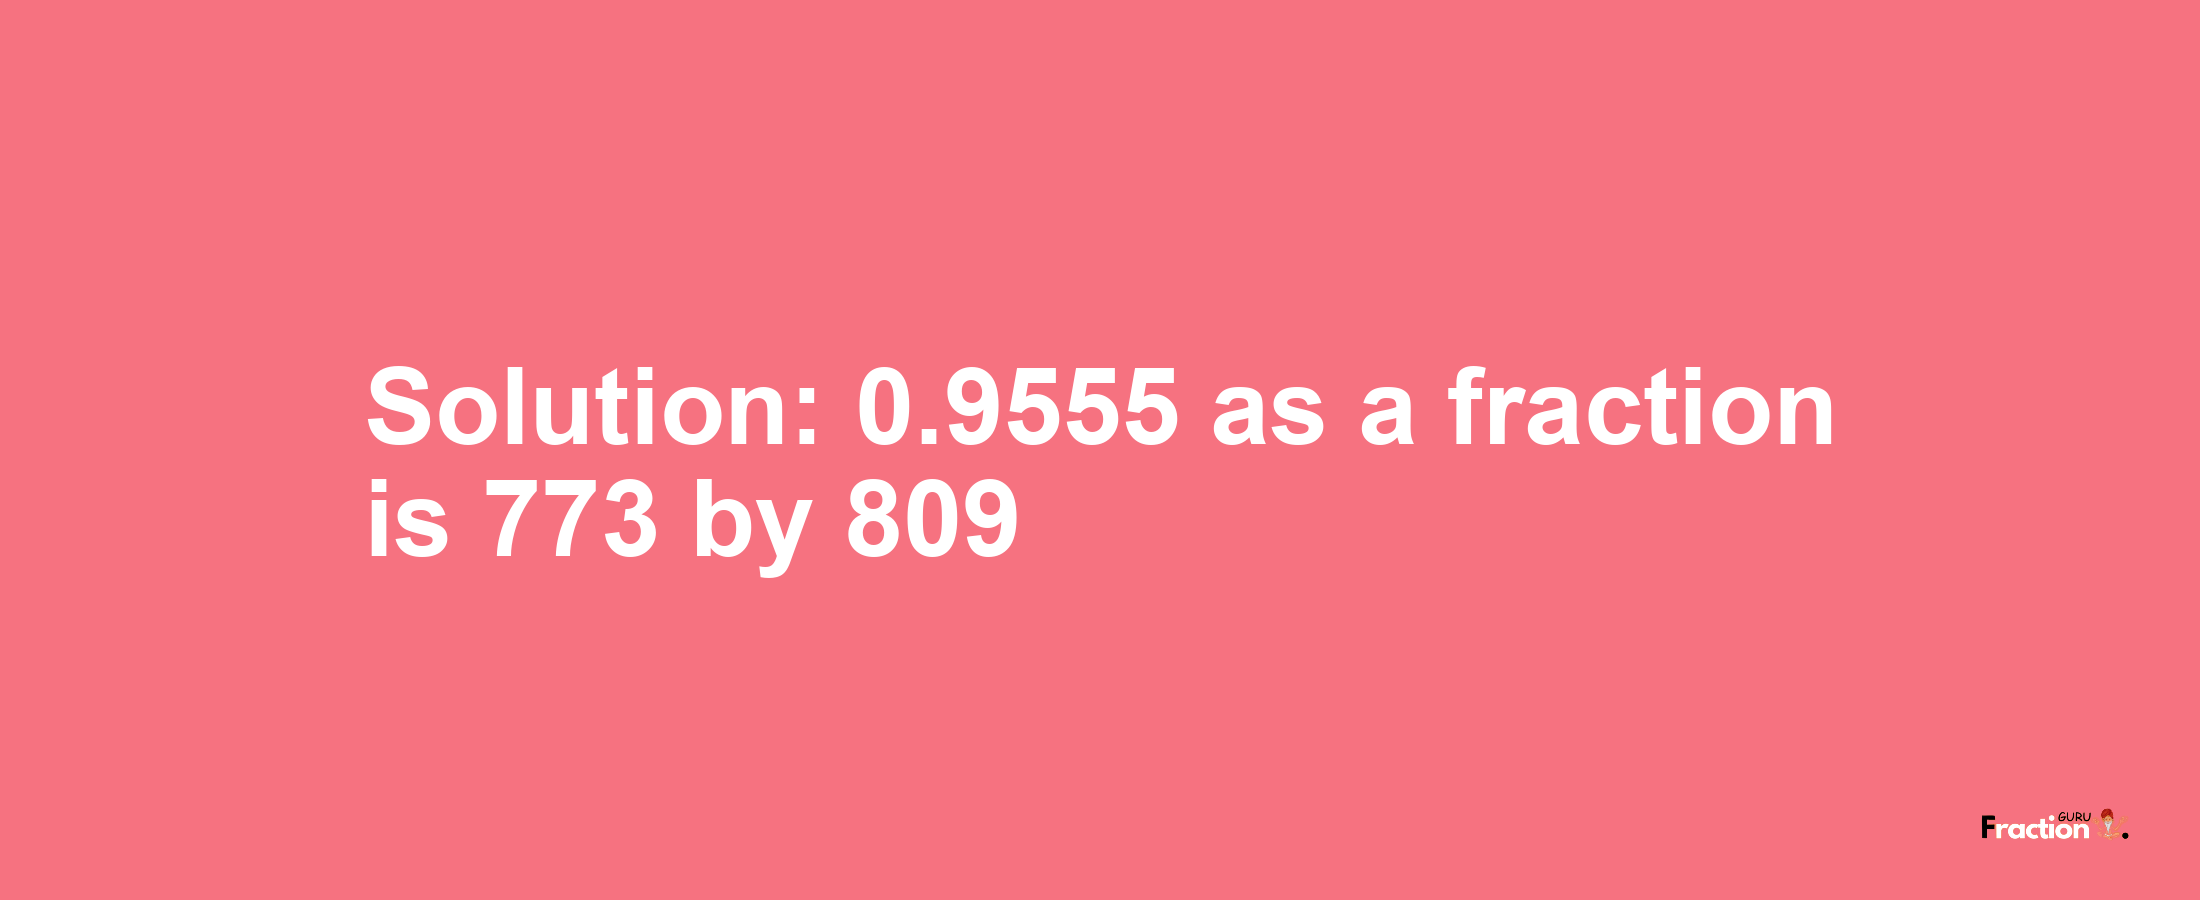 Solution:0.9555 as a fraction is 773/809